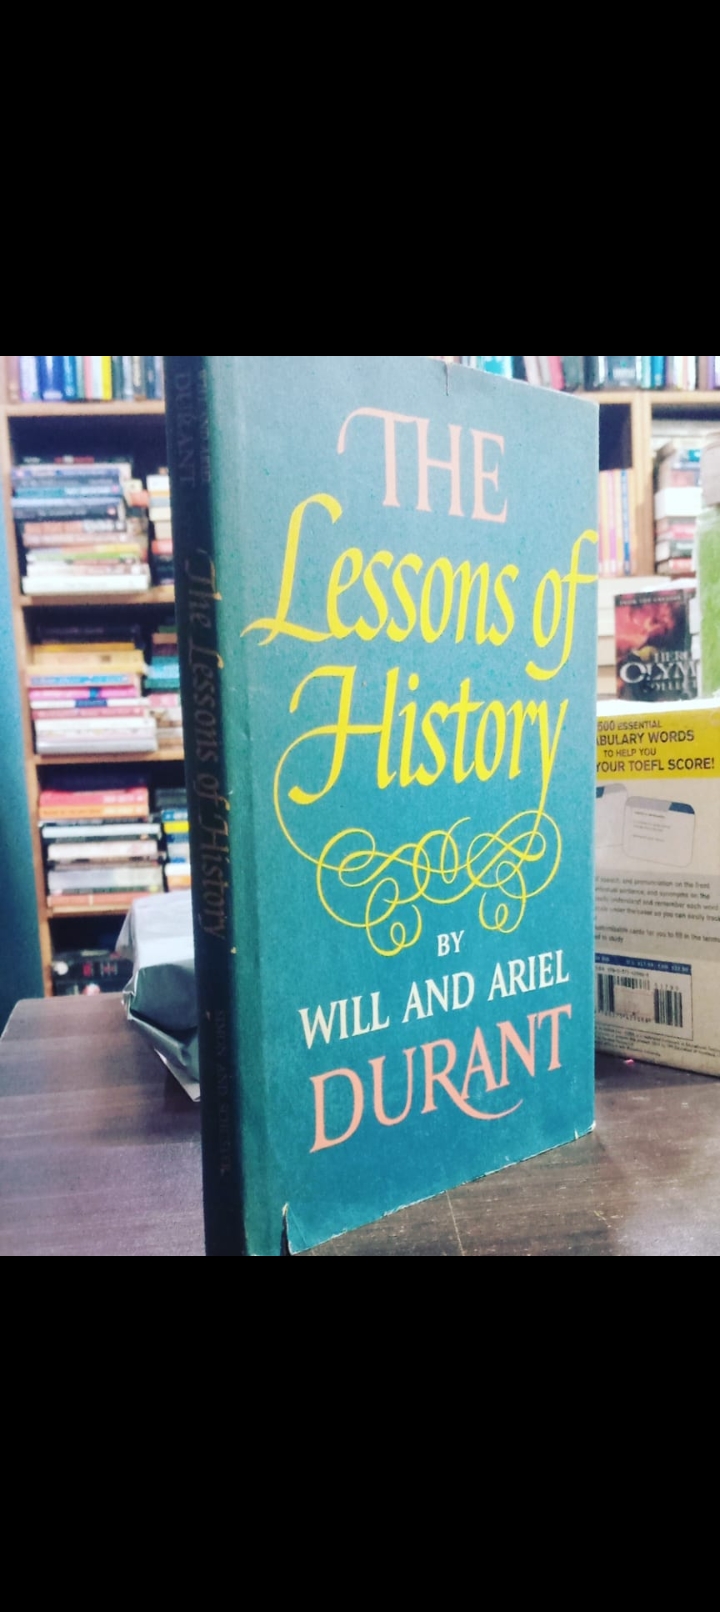 the lessons of history by will durant. 1st edition original hardcover